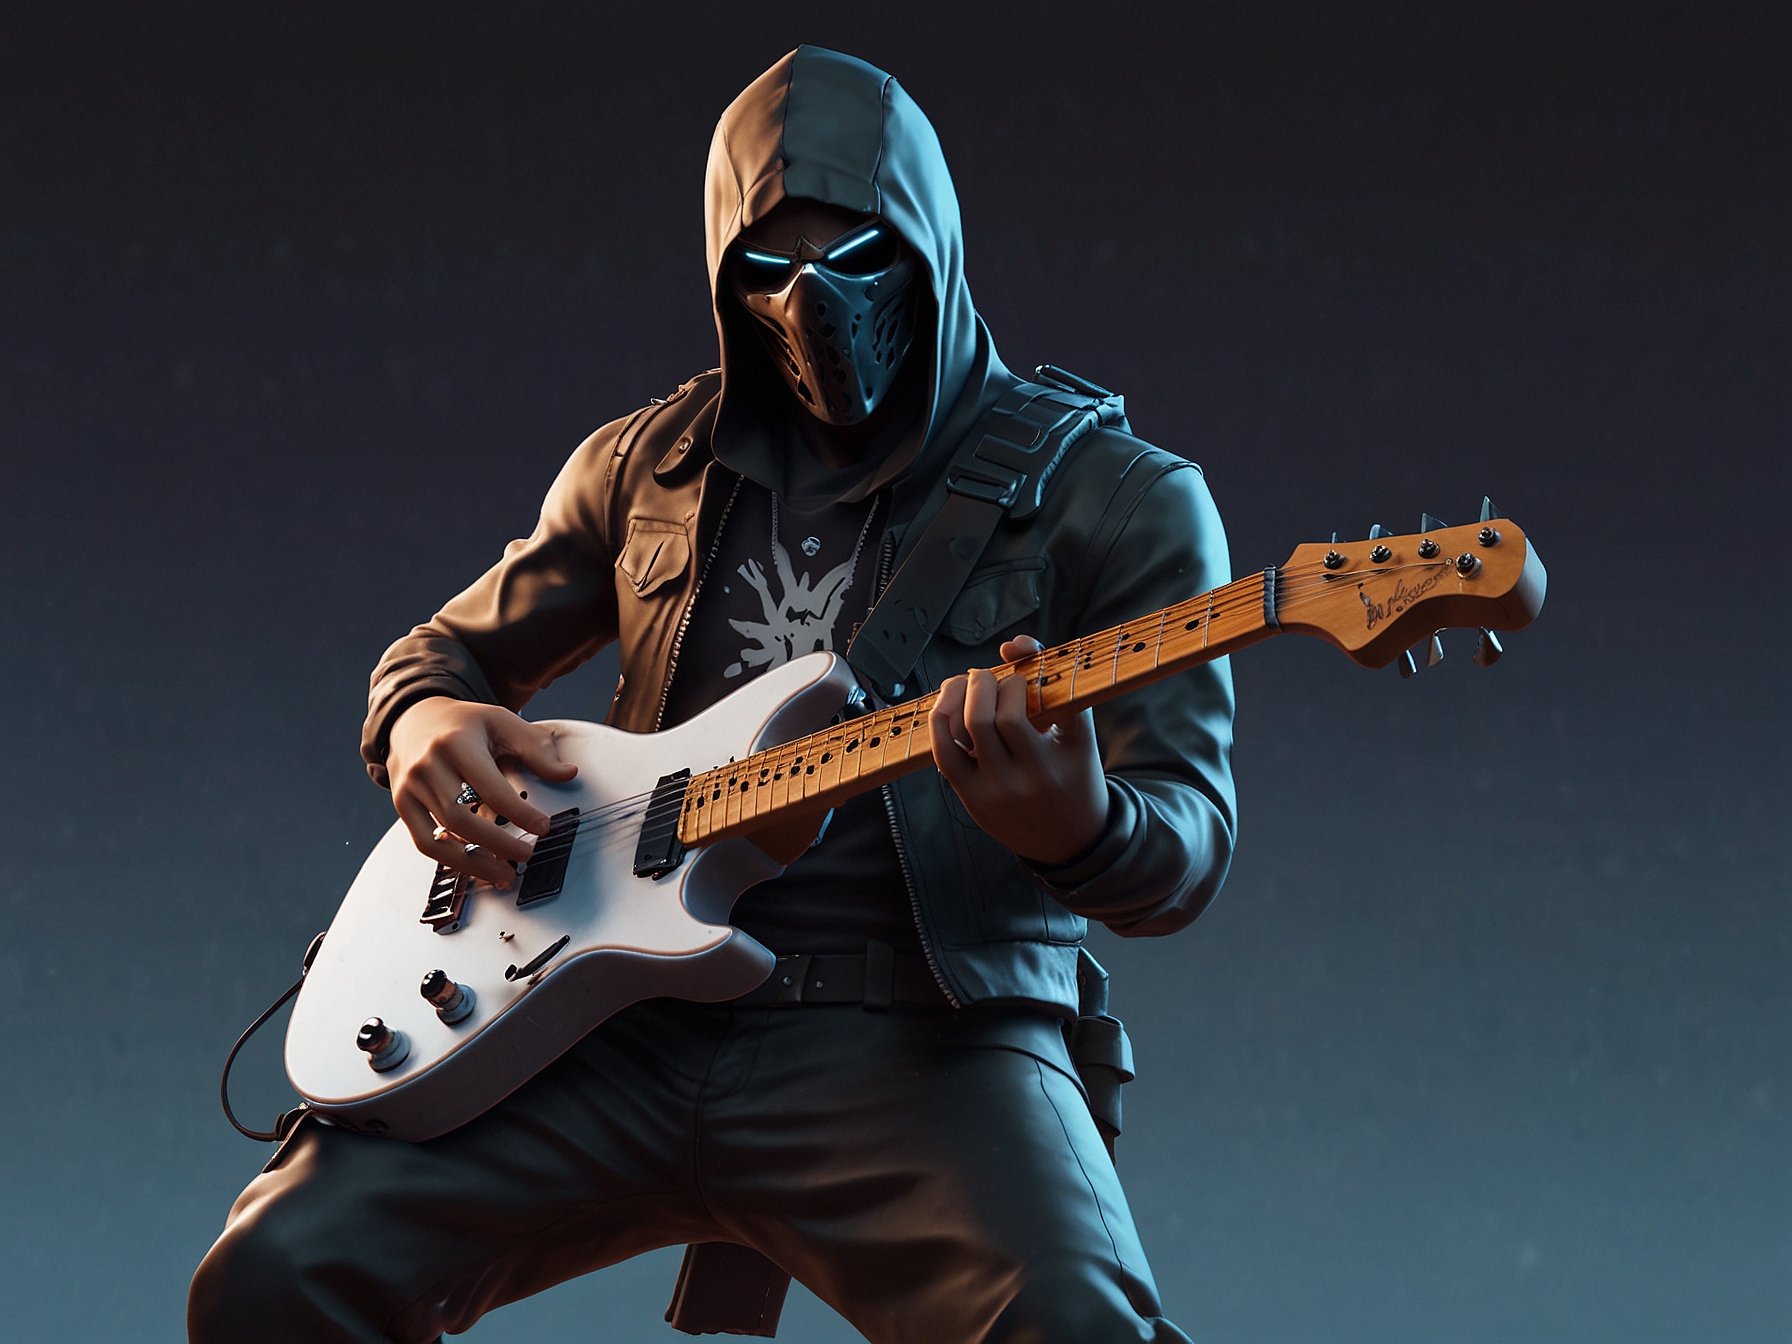 A Fortnite character rocking out in-game with a guitar, surrounded by dynamic visuals and iconic Metallica imagery, manifesting the high-energy integration of music and gaming.